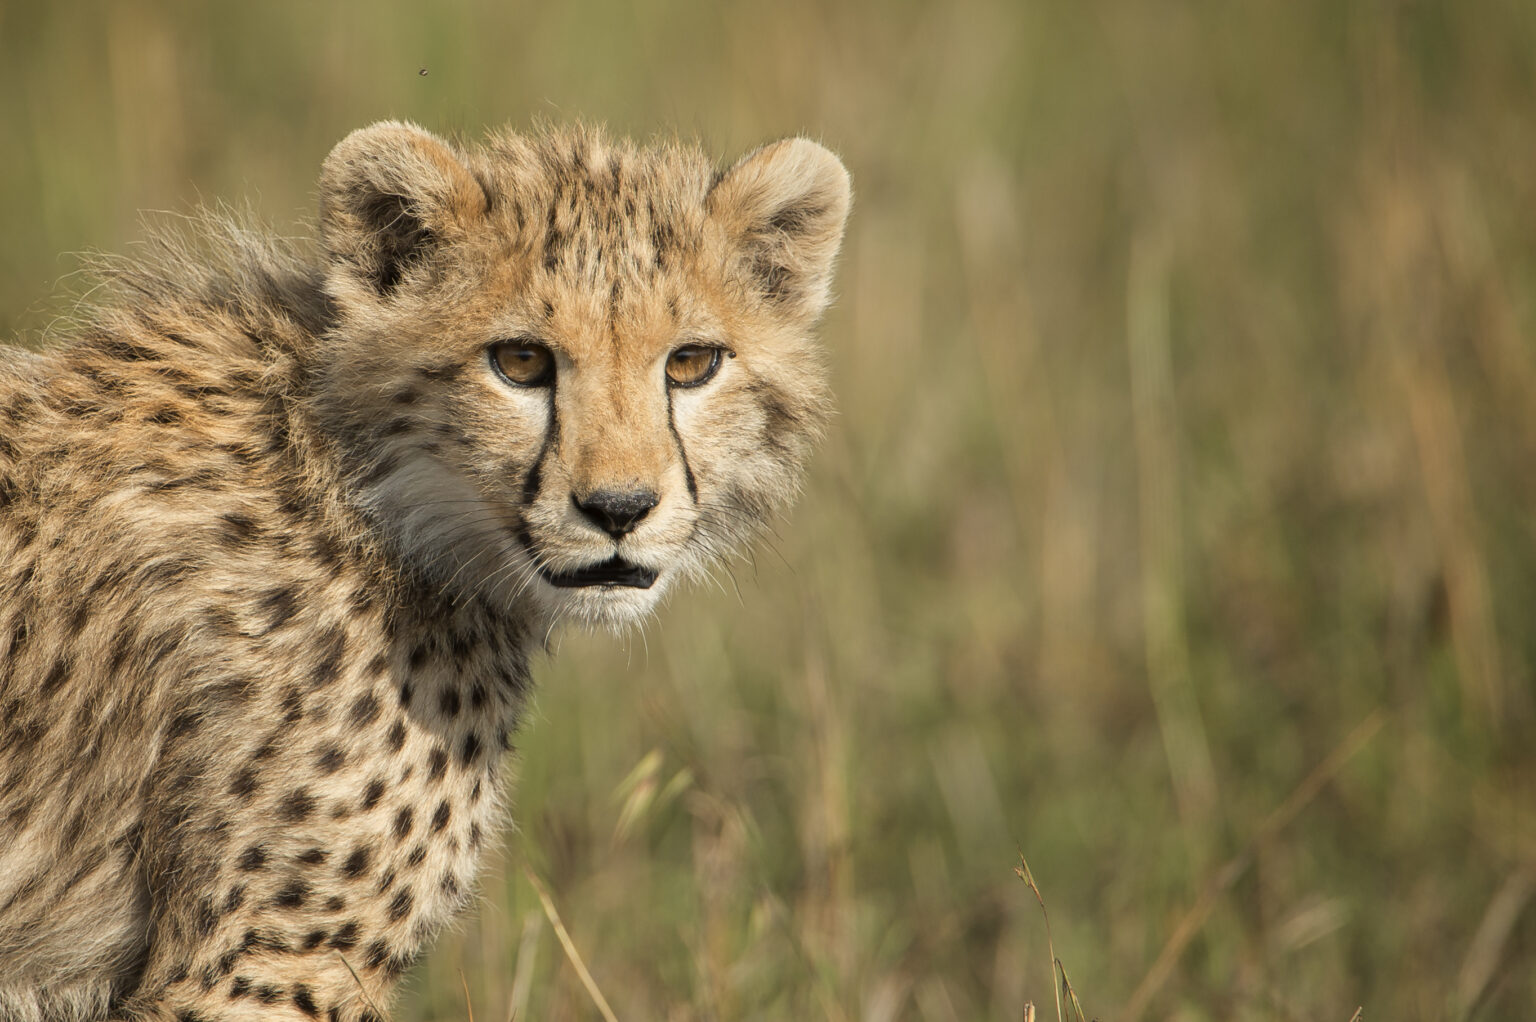 a young cheetah in a field of tall grass.